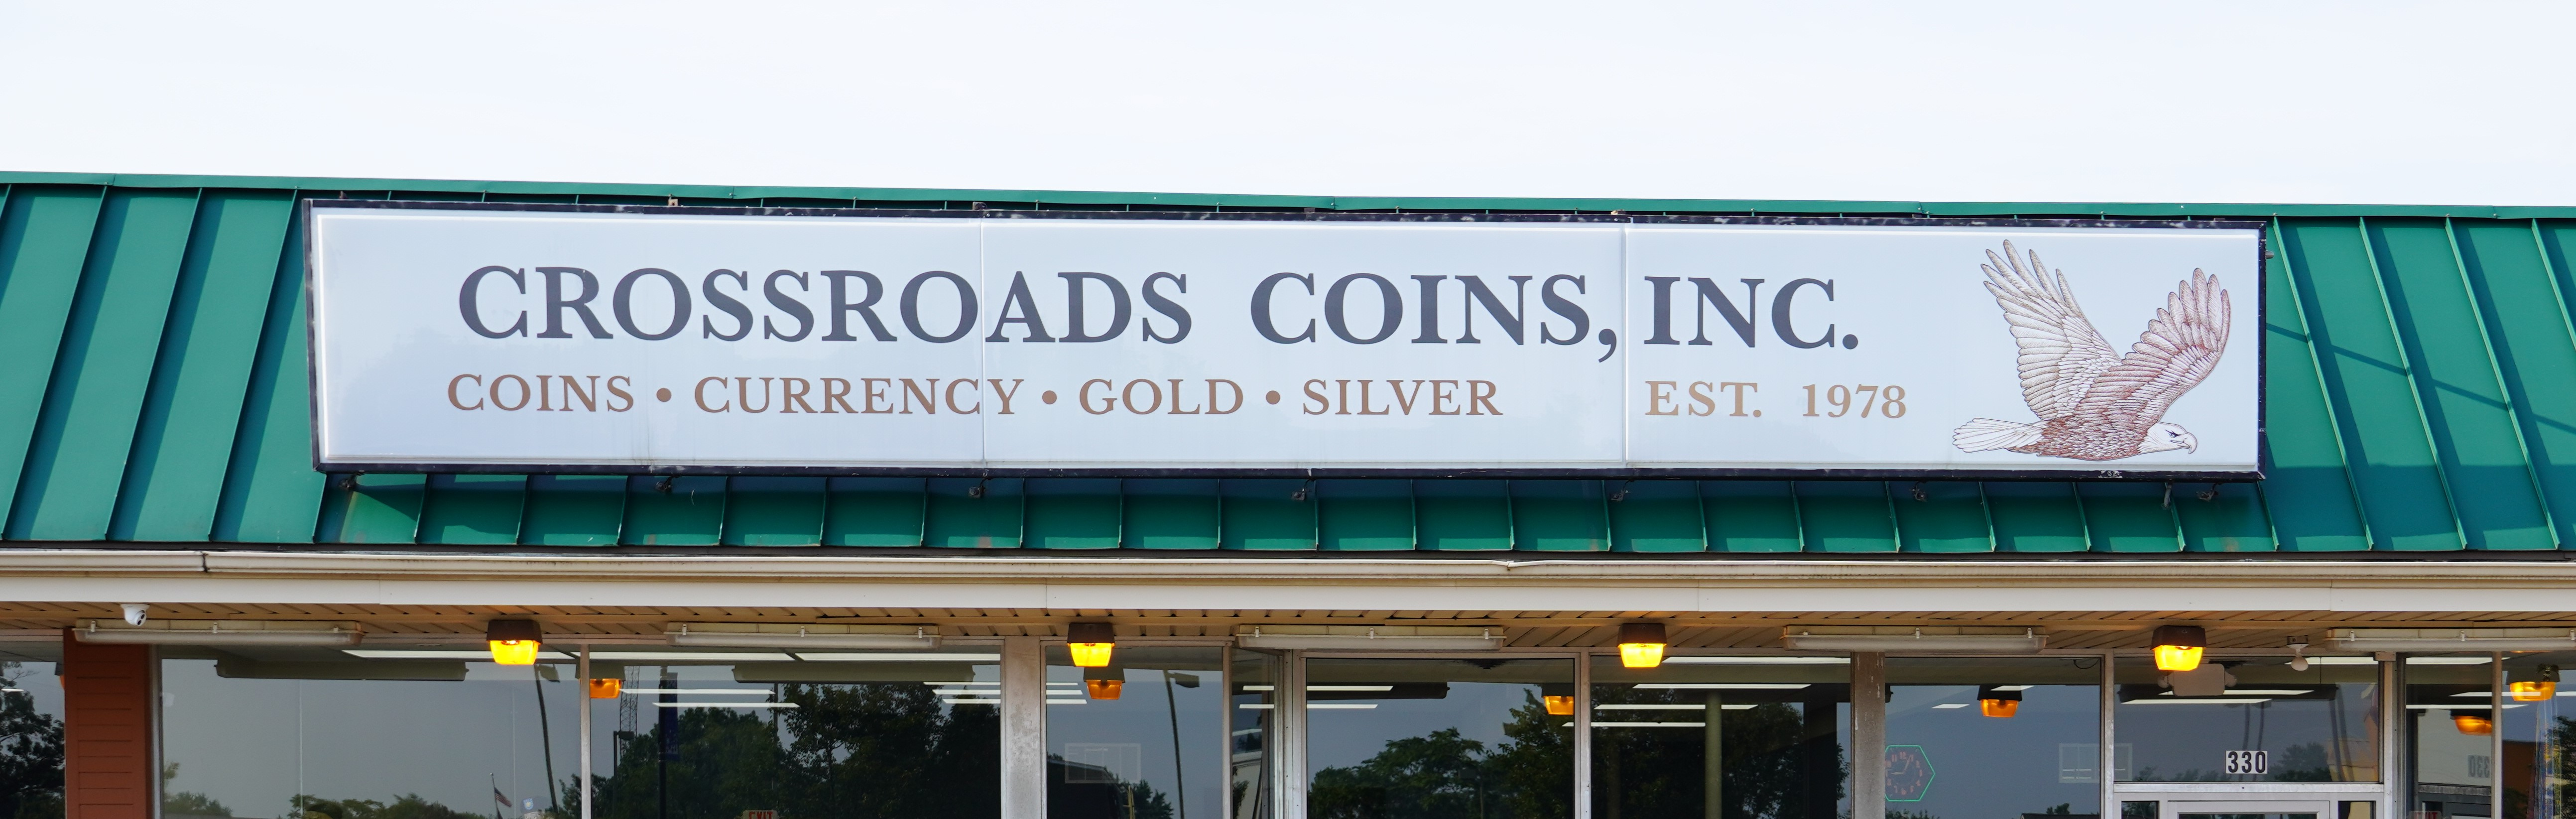 Crossroads Coins Dayton, Ohio Store Front sign